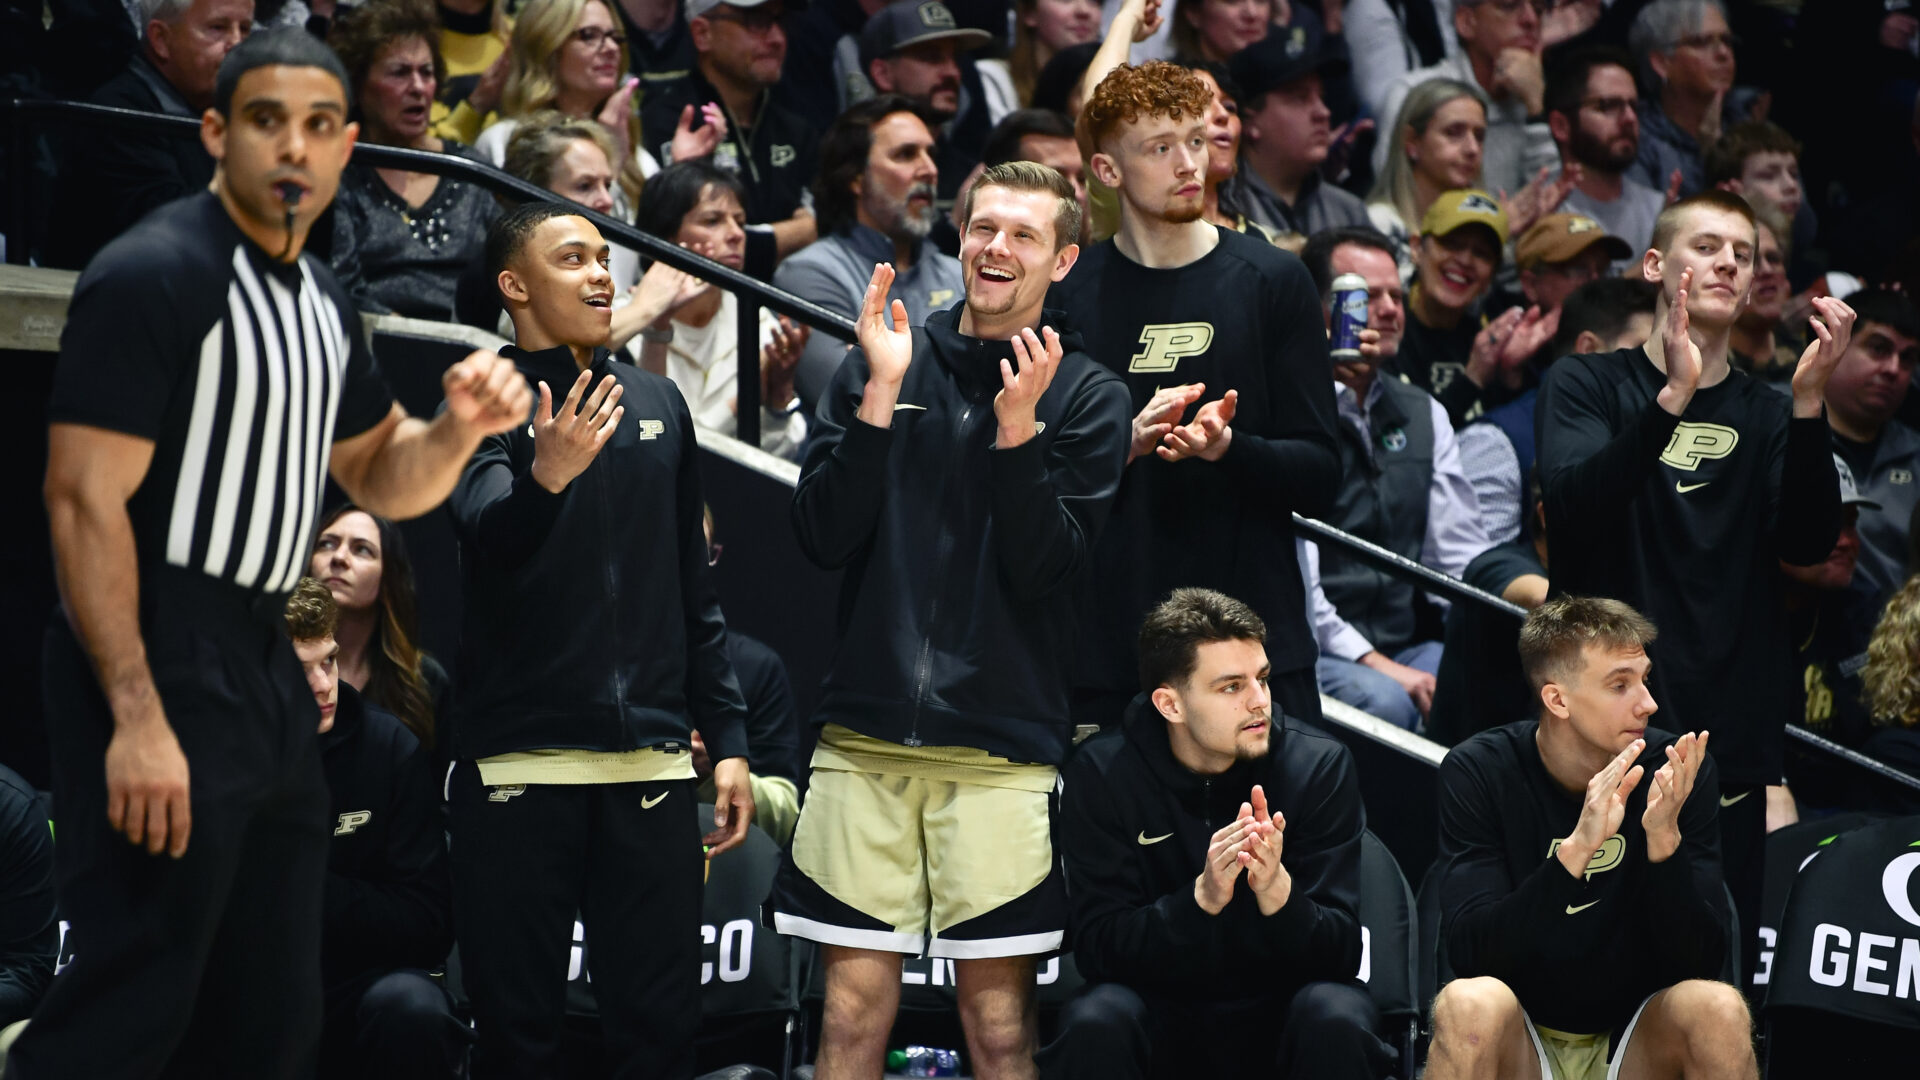 The Purdue men's basketball bench celebrates a positive play during action at Mackey Arena.